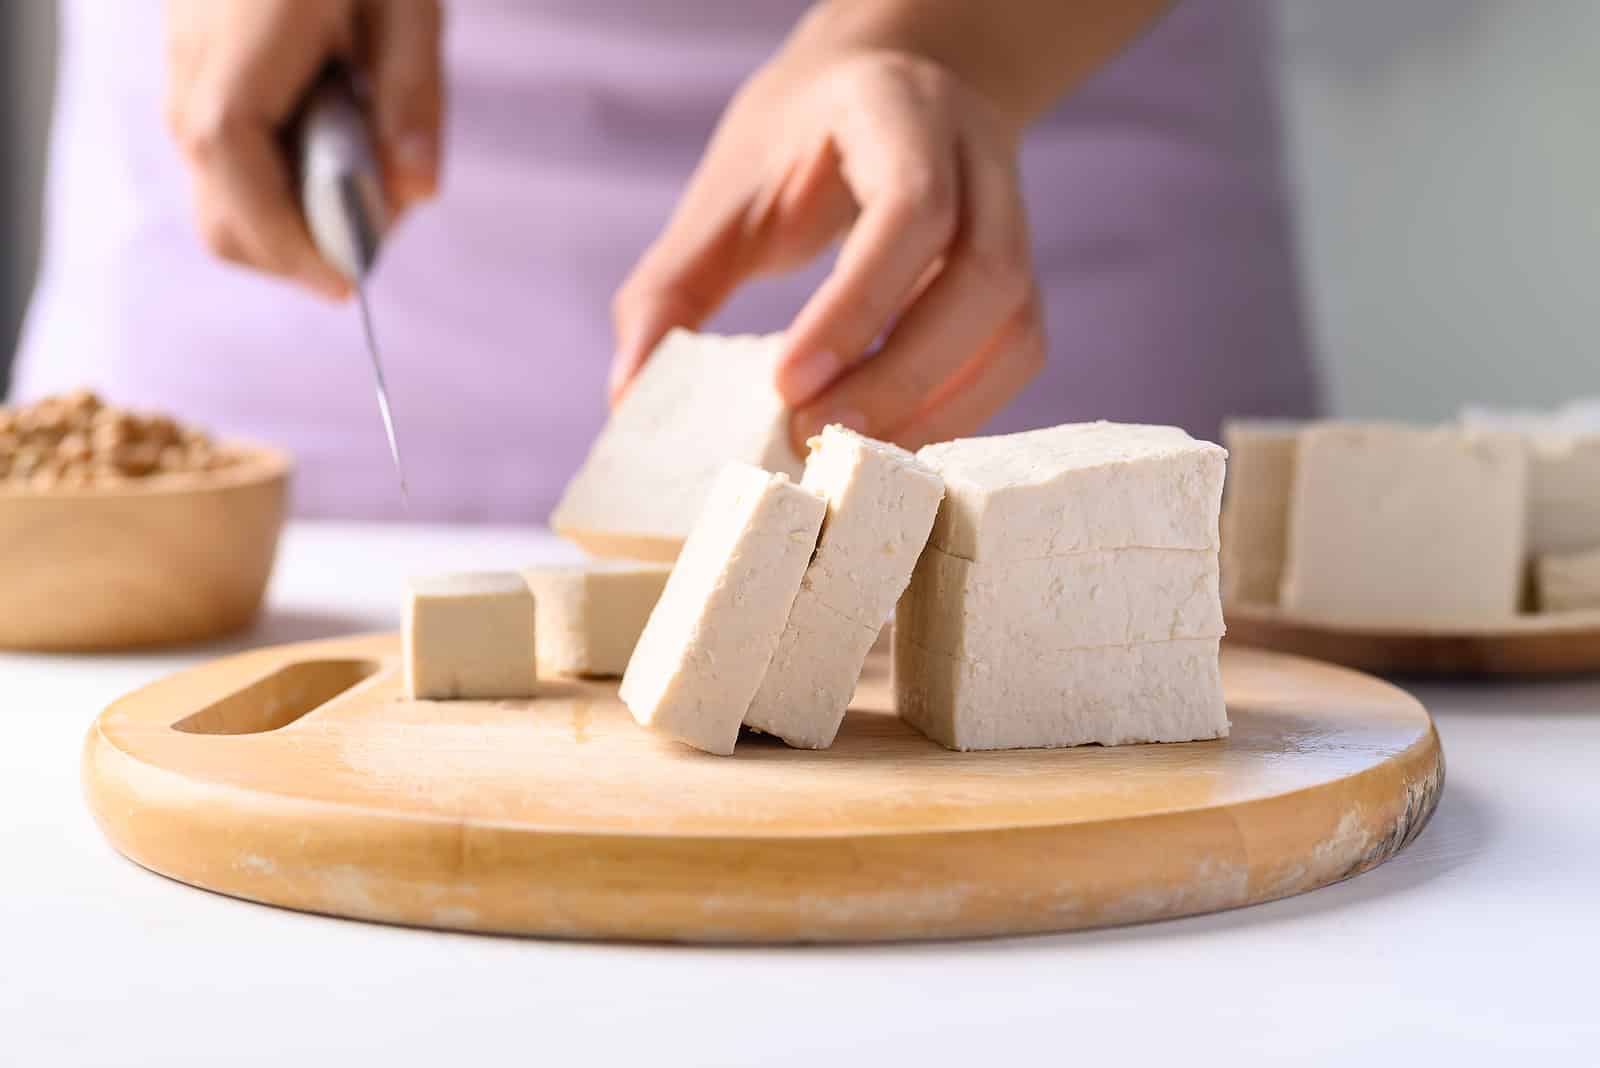 Cooking With Tofu How To Make Your Own Tofu Recipes (2)